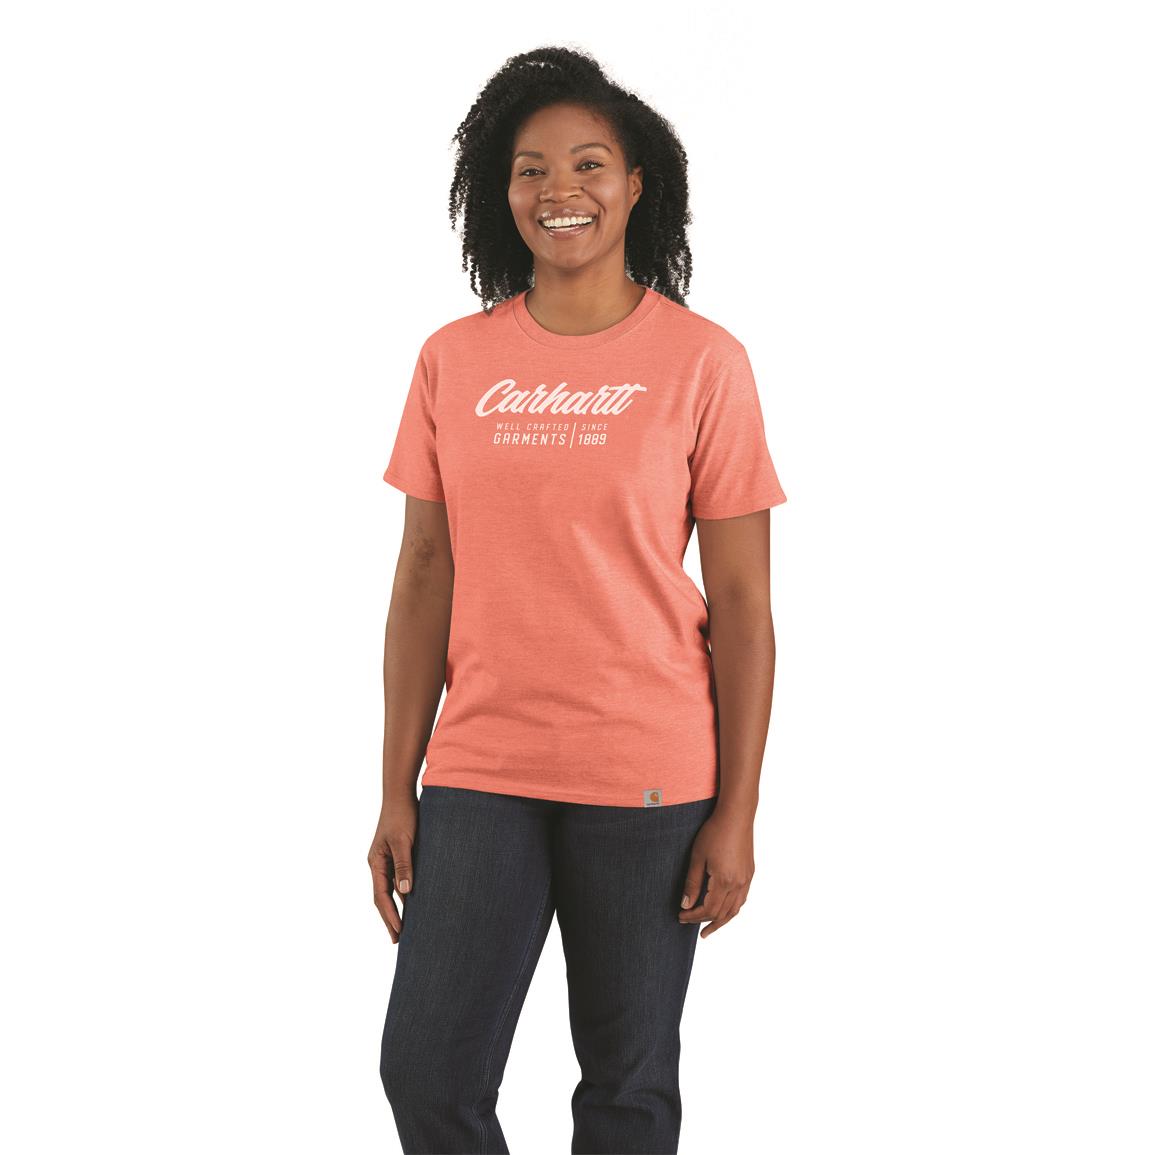 Carhartt Women's Loose Fit Heavyweight Crafted Graphic Shirt, Hibiscus Heather